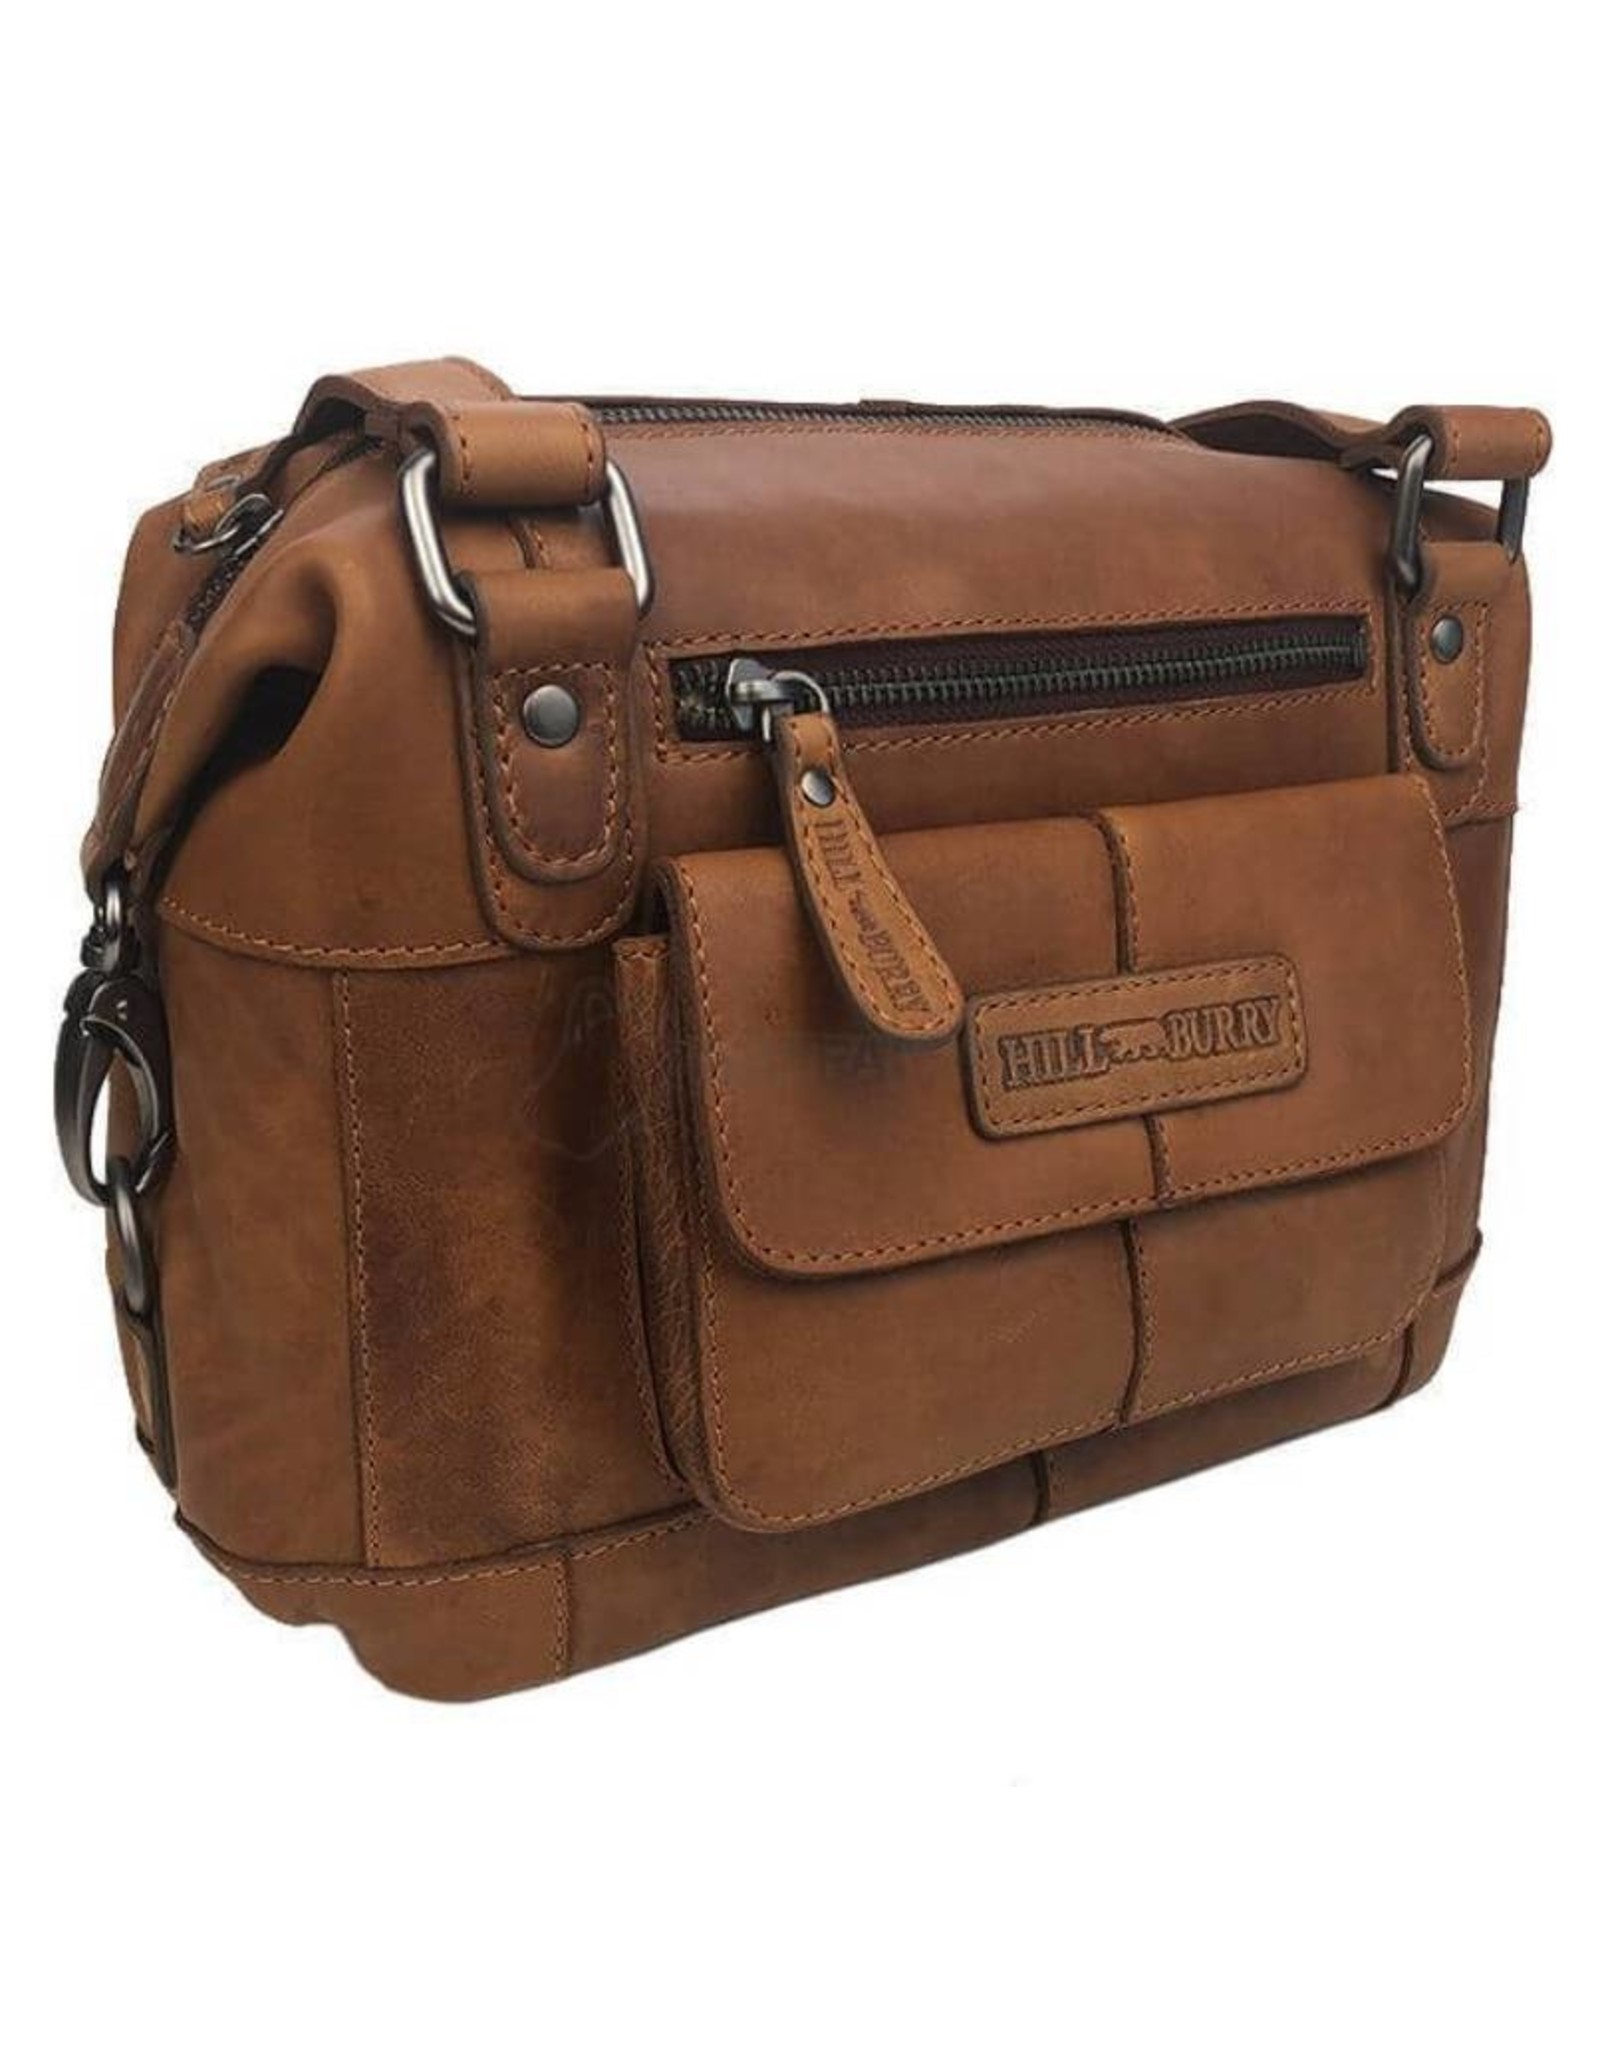 HillBurry Leather Shoulder bags  Leather crossbody bags - HillBurry Leather shoulder bag with long handles brown